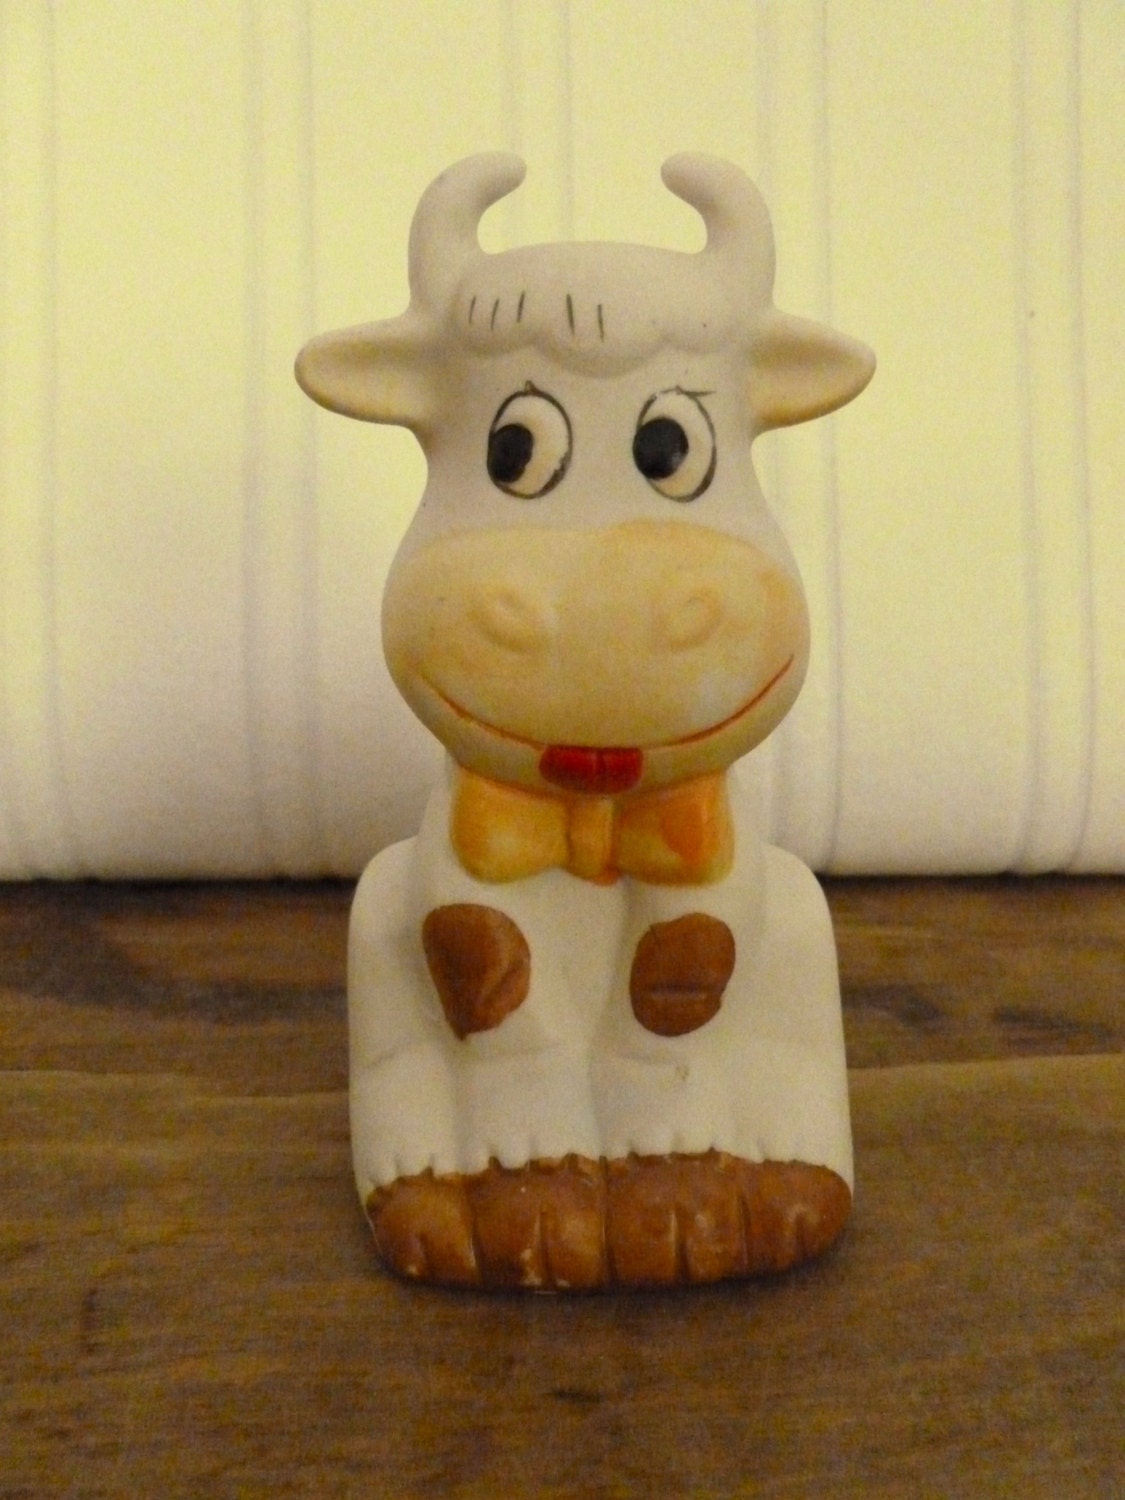 Vintage Ceramic Cow Bell Figurine Ceramic Cow by Lego